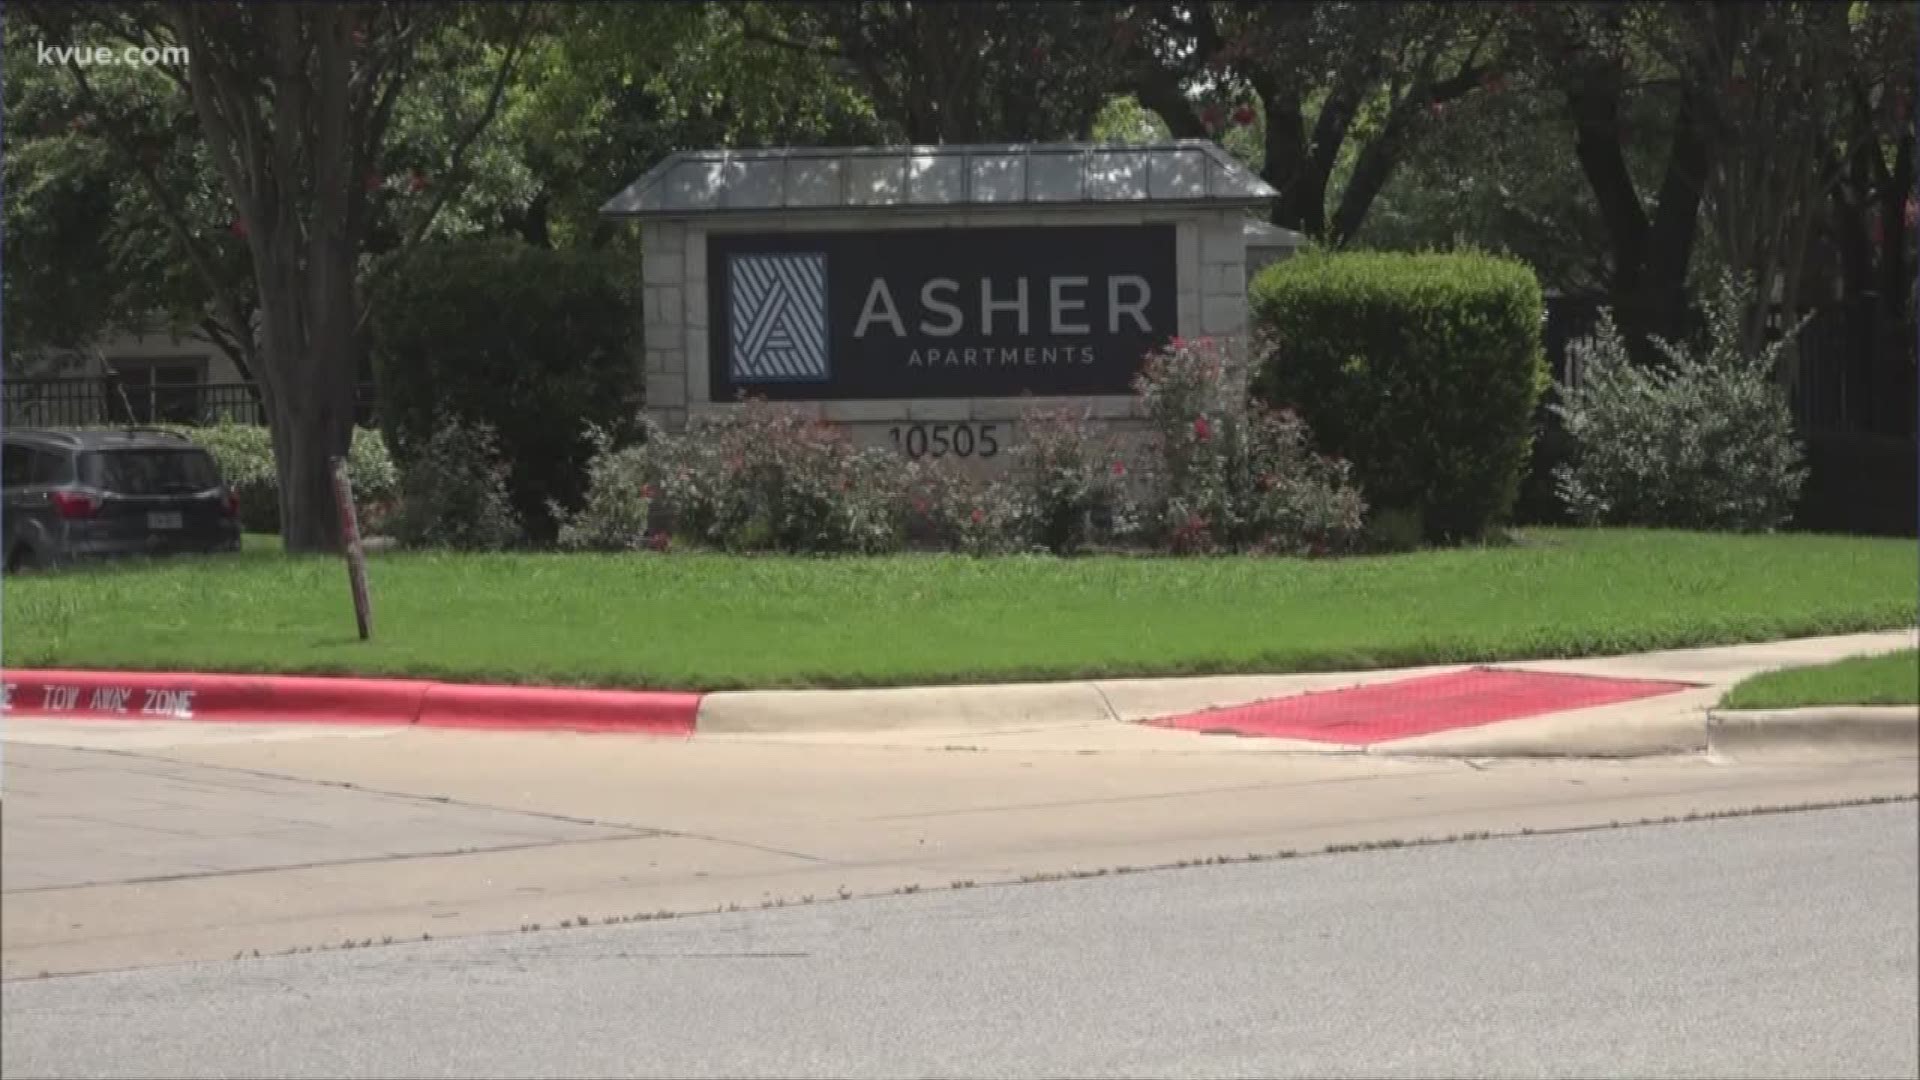 Austin's Housing Authority is turning an existing apartment complex in South Austin into an affordable housing complex.